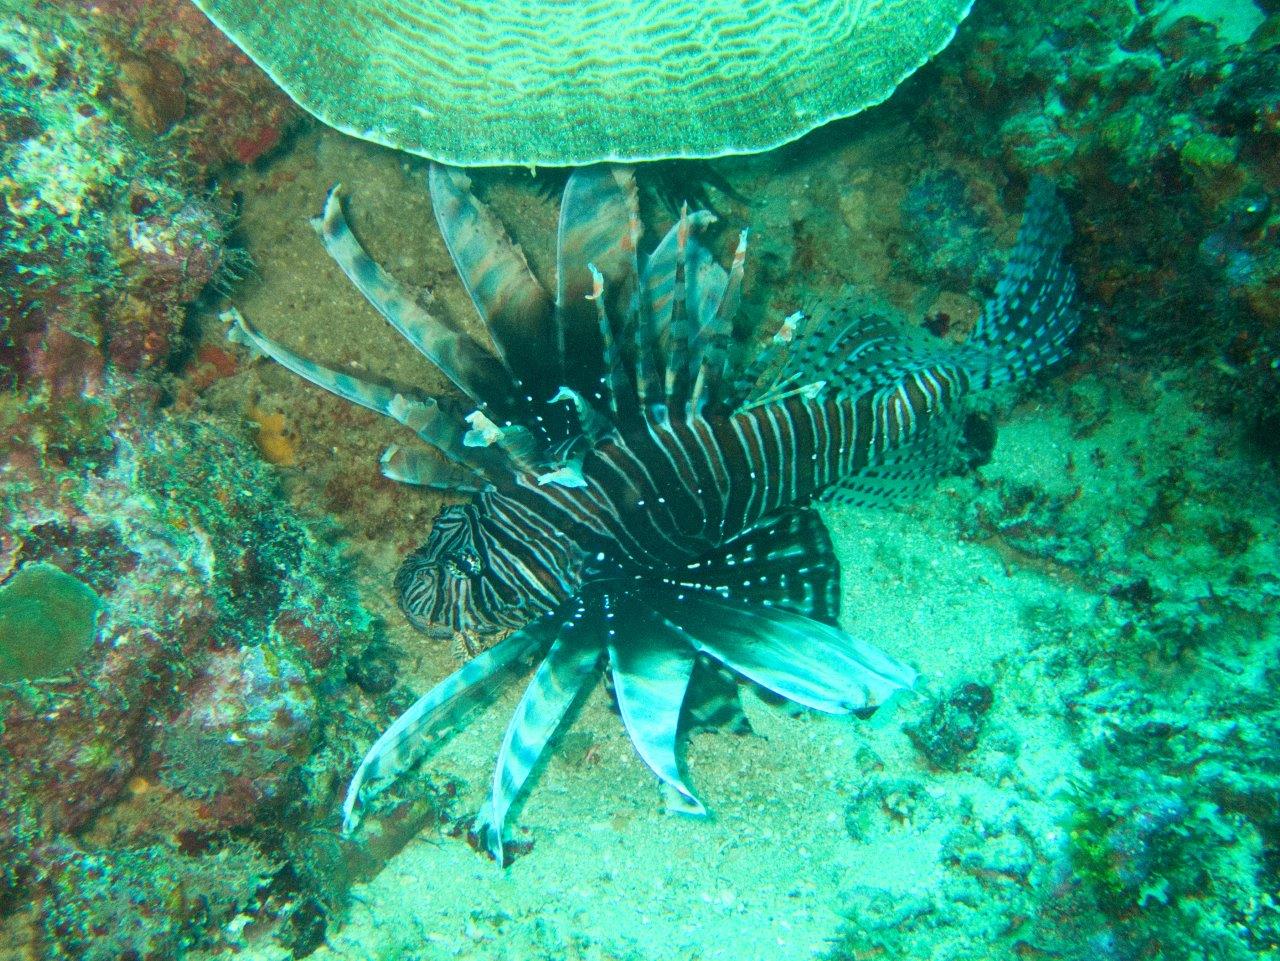 Lionfish, it's what's for dinner!